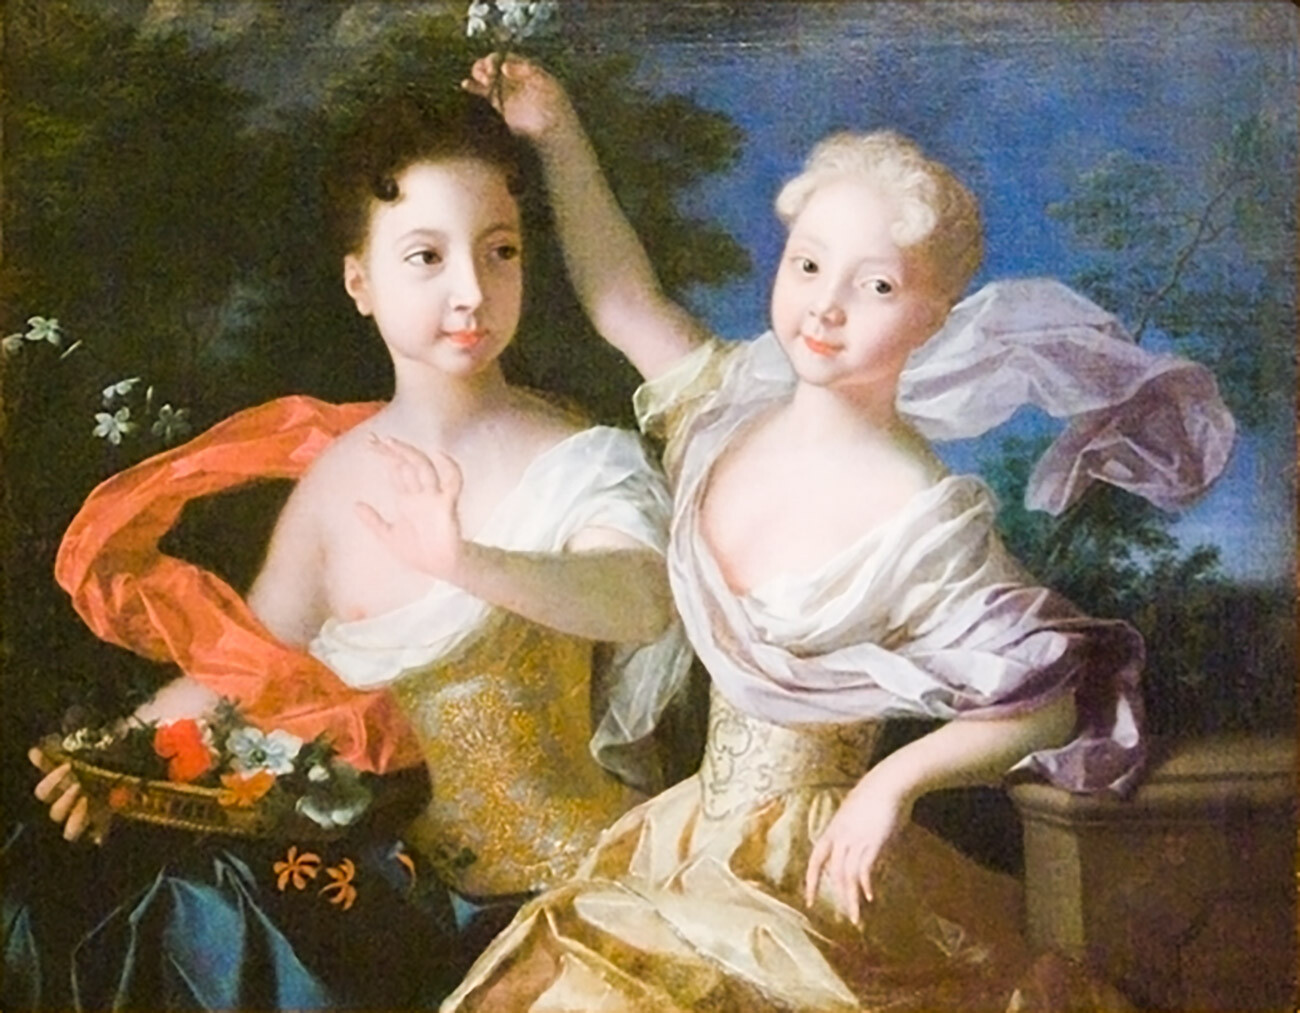 Elizabeth (R) and her sister Anna (L), 1717